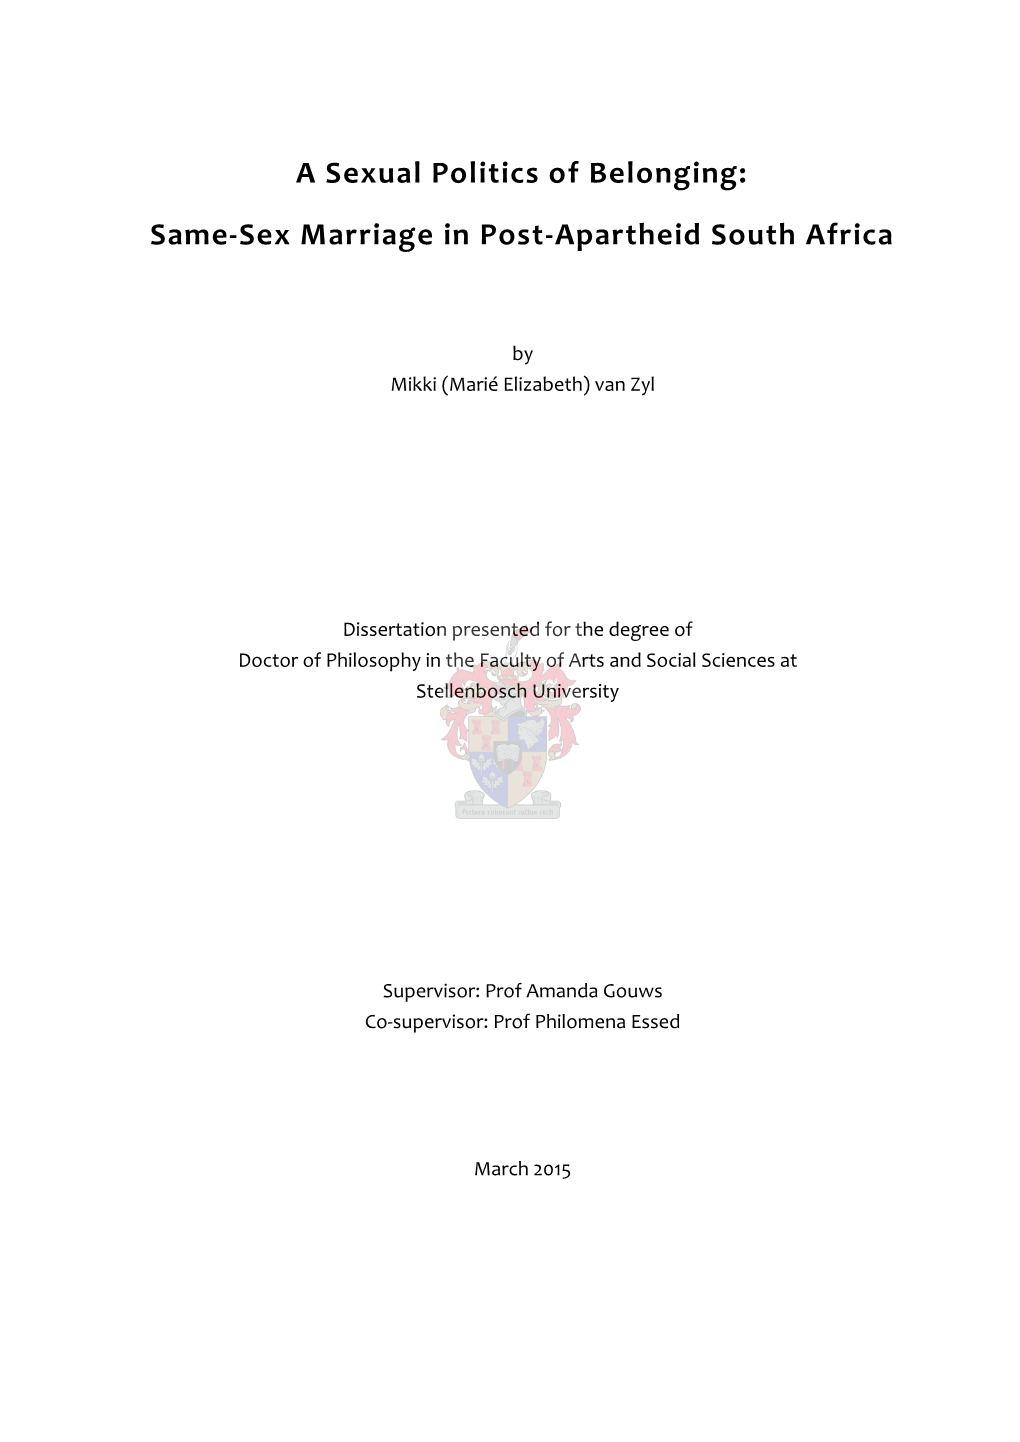 A Sexual Politics of Belonging: Same-Sex Marriage in Post-Apartheid South Africa